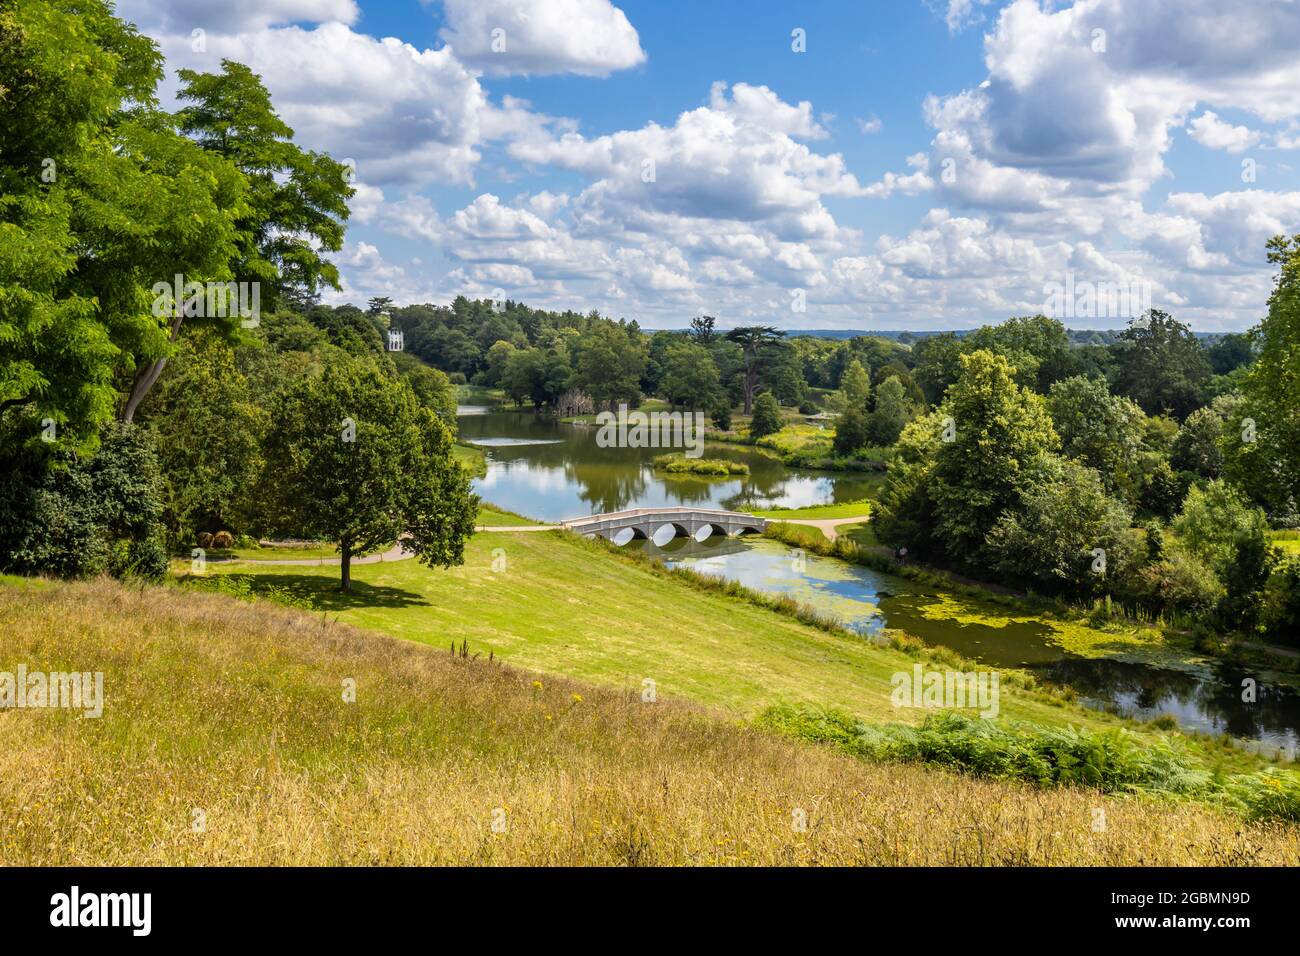 View of the Five Arch Bridge and lake in the Hamilton Landscapes of Painshill Park, landscaped gardens in Cobham, Surrey, south-east England, UK Stock Photo